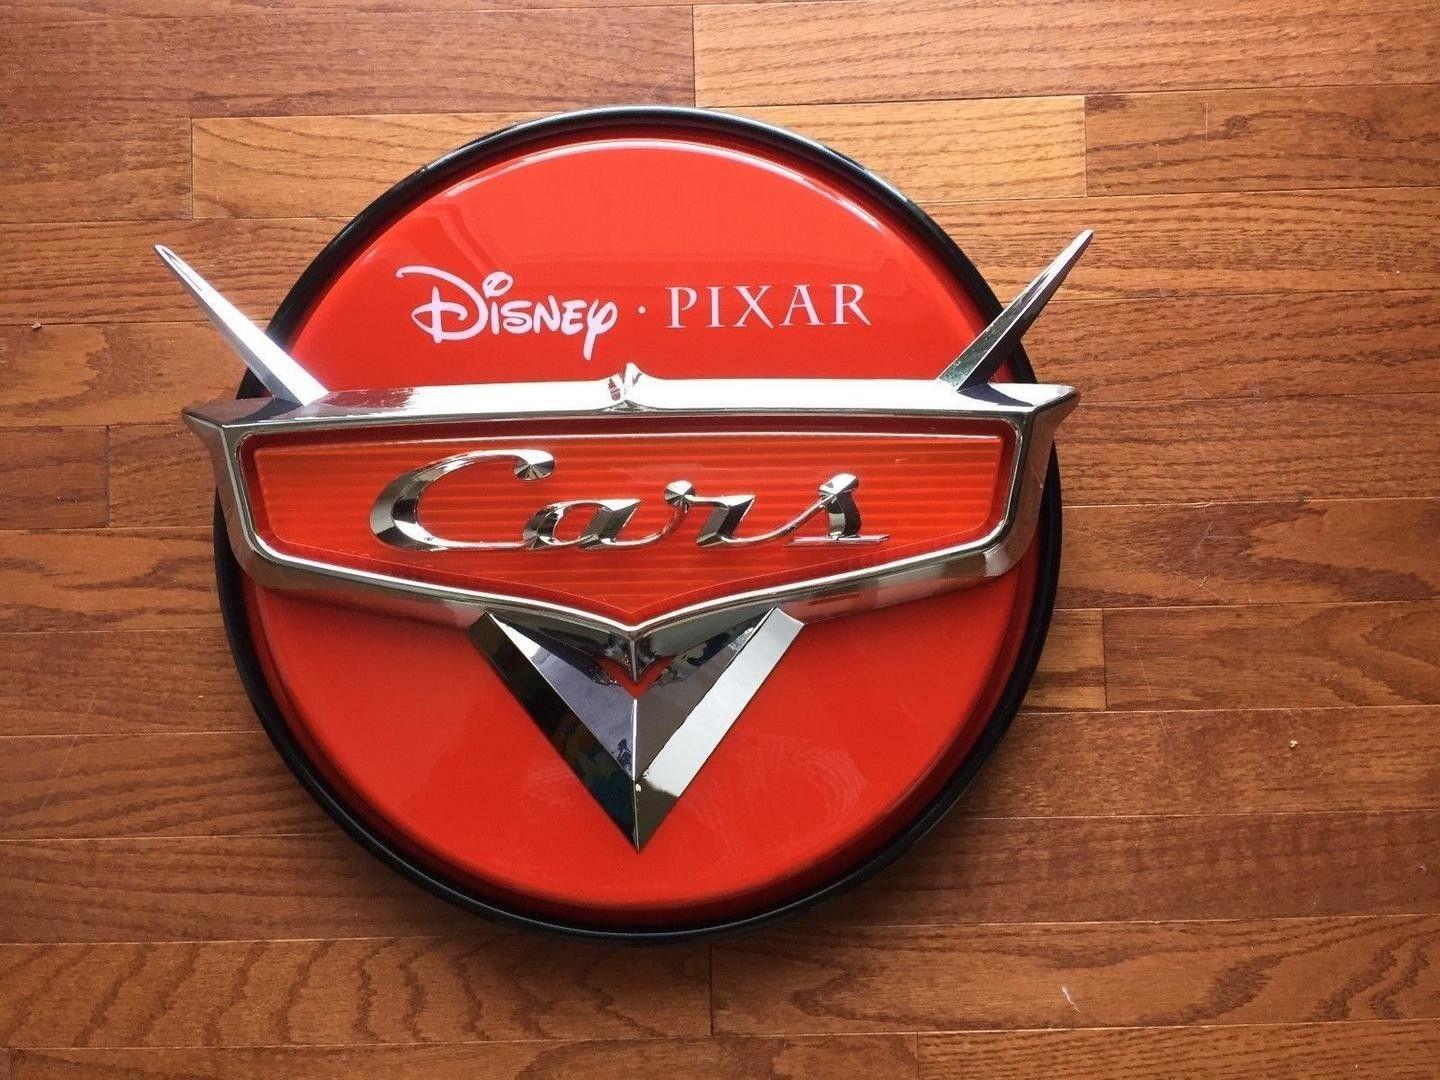 Disney Pixar Cars Logo - Disney Pixar Cars Logo Illuminated Sign BRAND NEW 100% Authentic ...